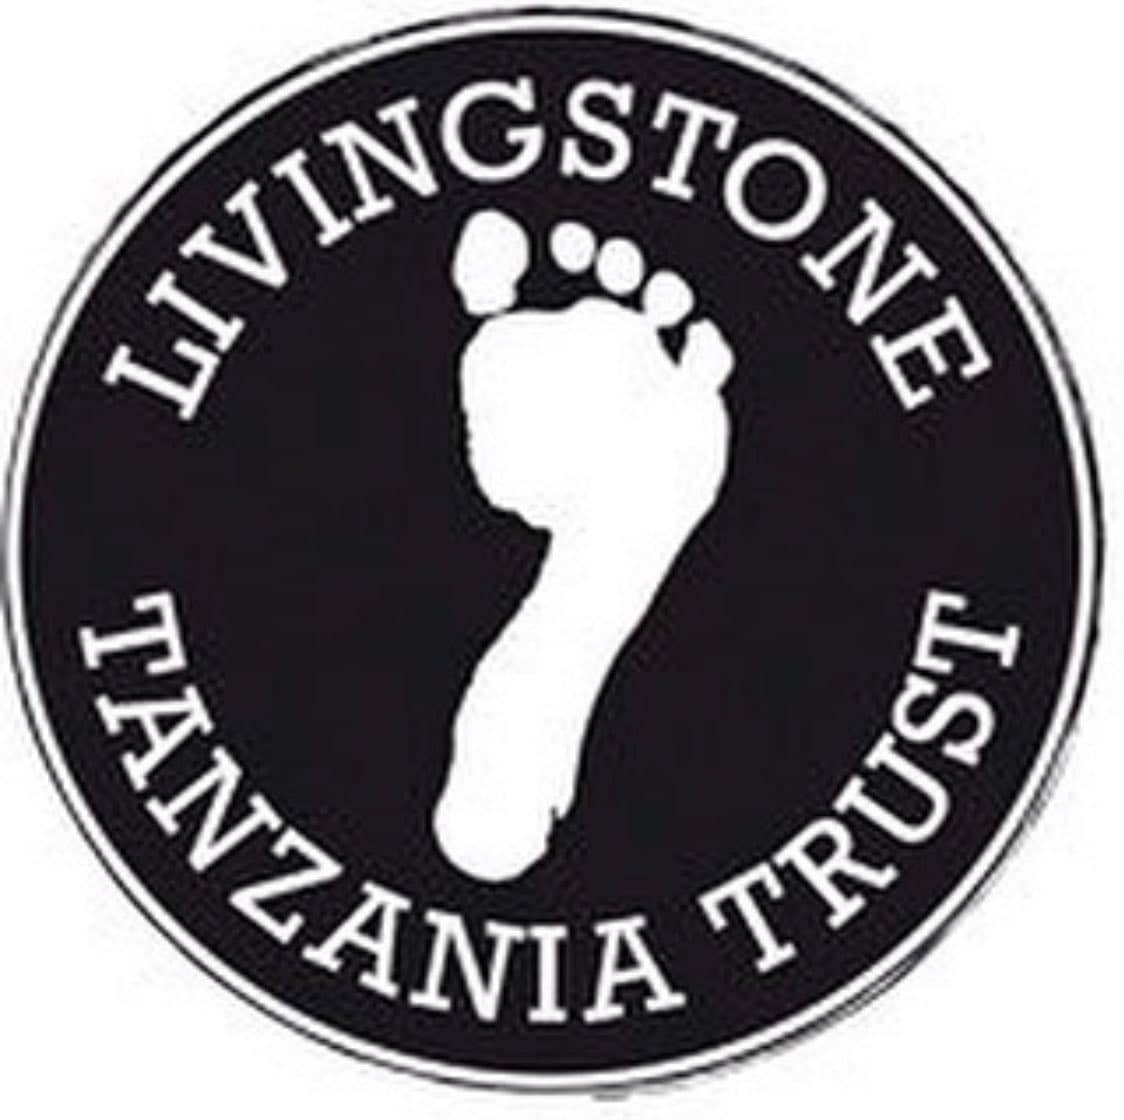 This week’s Charity Tuesday goes to @ltt_tanzania who are joining the Peak District Challenge for...